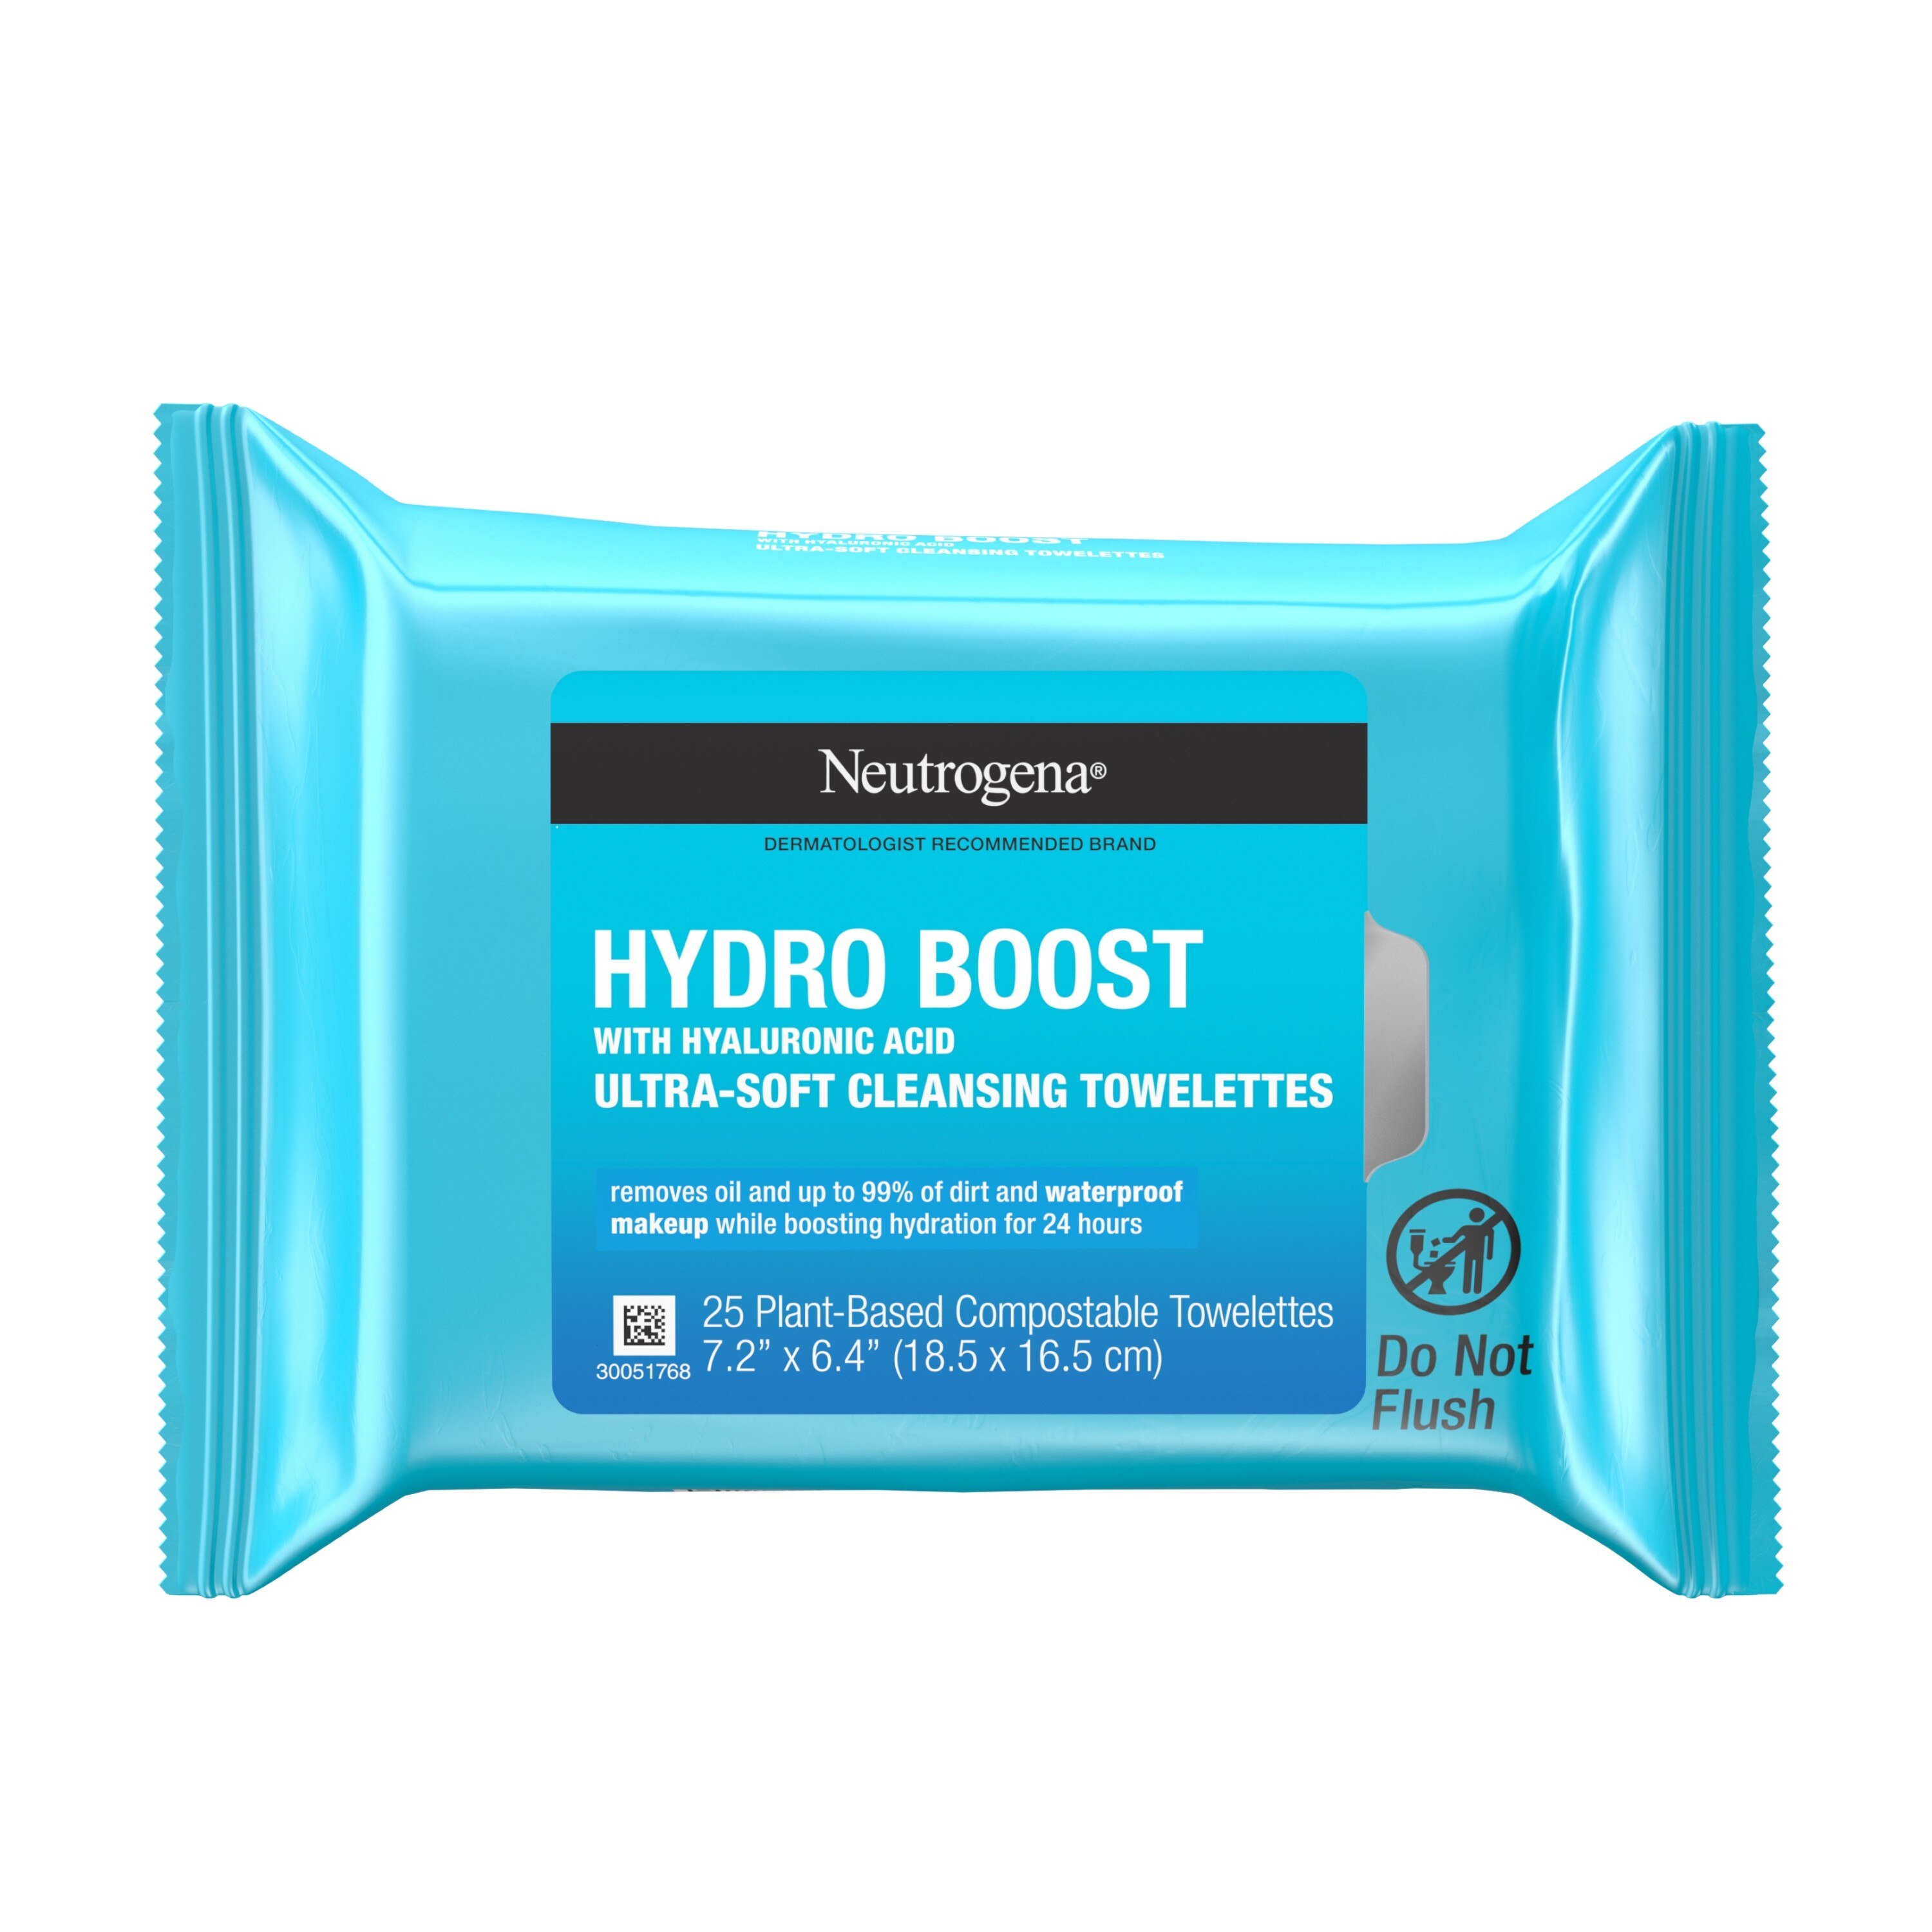 Neutrogena HydroBoost Face Cleansing & Makeup Remover Wipes, 25CT